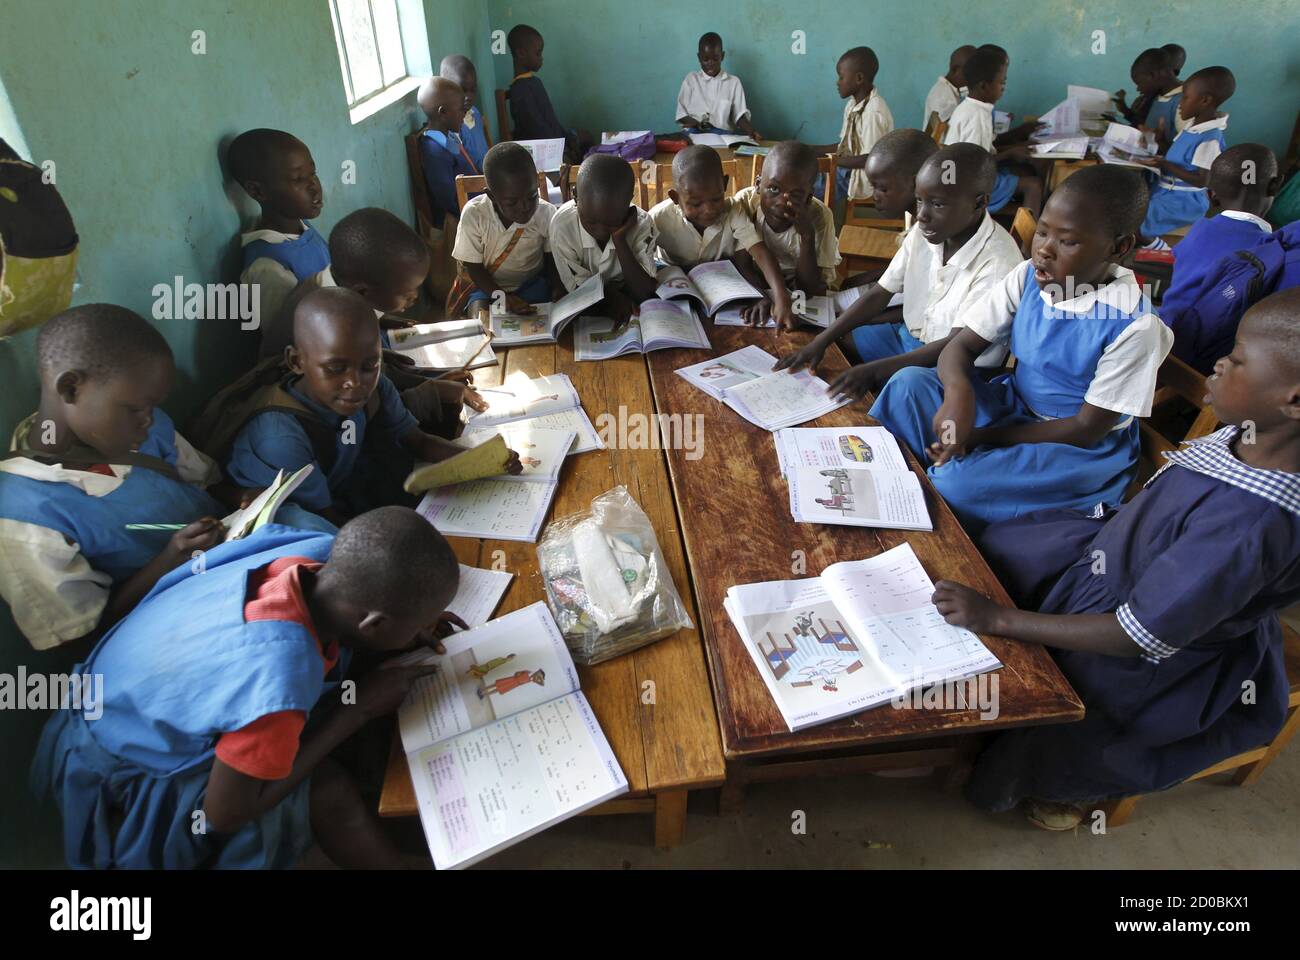 Pupils attend a class session at the Senator Obama primary school in the U.S. President Barack Obama's ancestral village of Nyang'oma Kogelo, west of Kenya's capital Nairobi, July 16, 2015. Obama visits Kenya and Ethiopia in July, his third major trip to Sub-Saharan Africa after travelling to Ghana in 2009 and to Tanzania, Senegal and South Africa in 2011. He has also visited Egypt, in North Africa, and South Africa for Nelson Mandela's funeral. Obama will be welcomed by a continent that had expected closer attention from a man they claim as their son, a sentiment felt acutely in the Kenyan vi Stock Photo